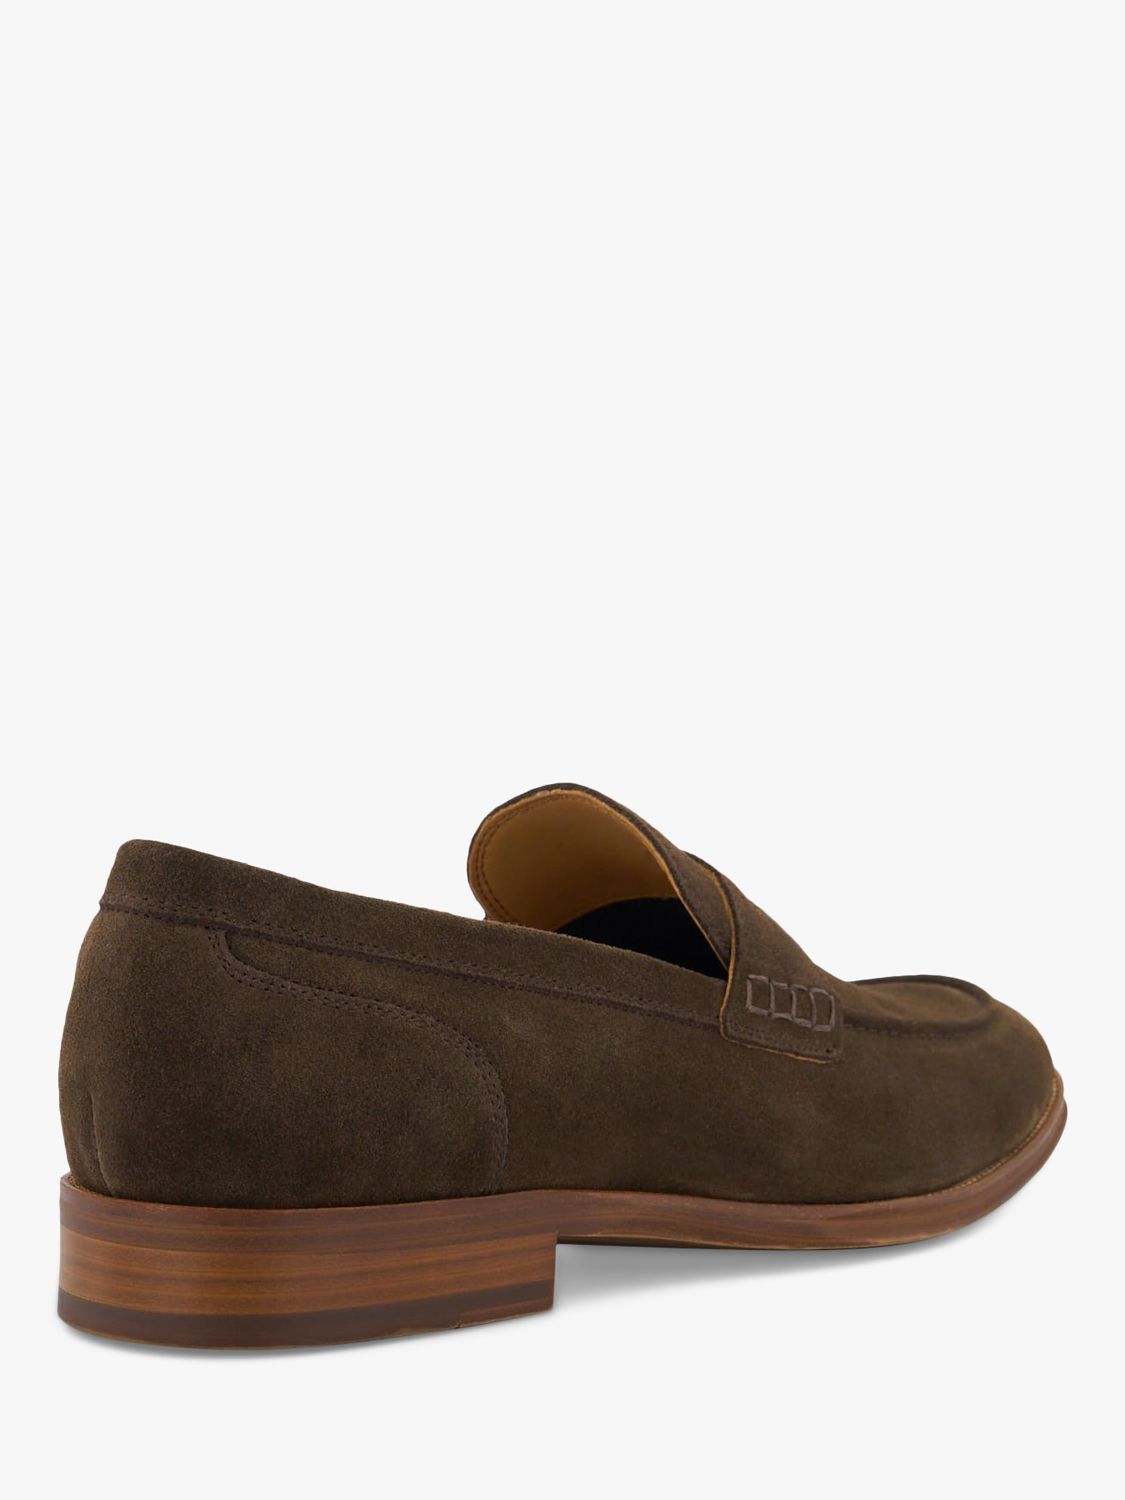 Buy Dune Sulli Suede Moccasin Shoes, Brown Online at johnlewis.com